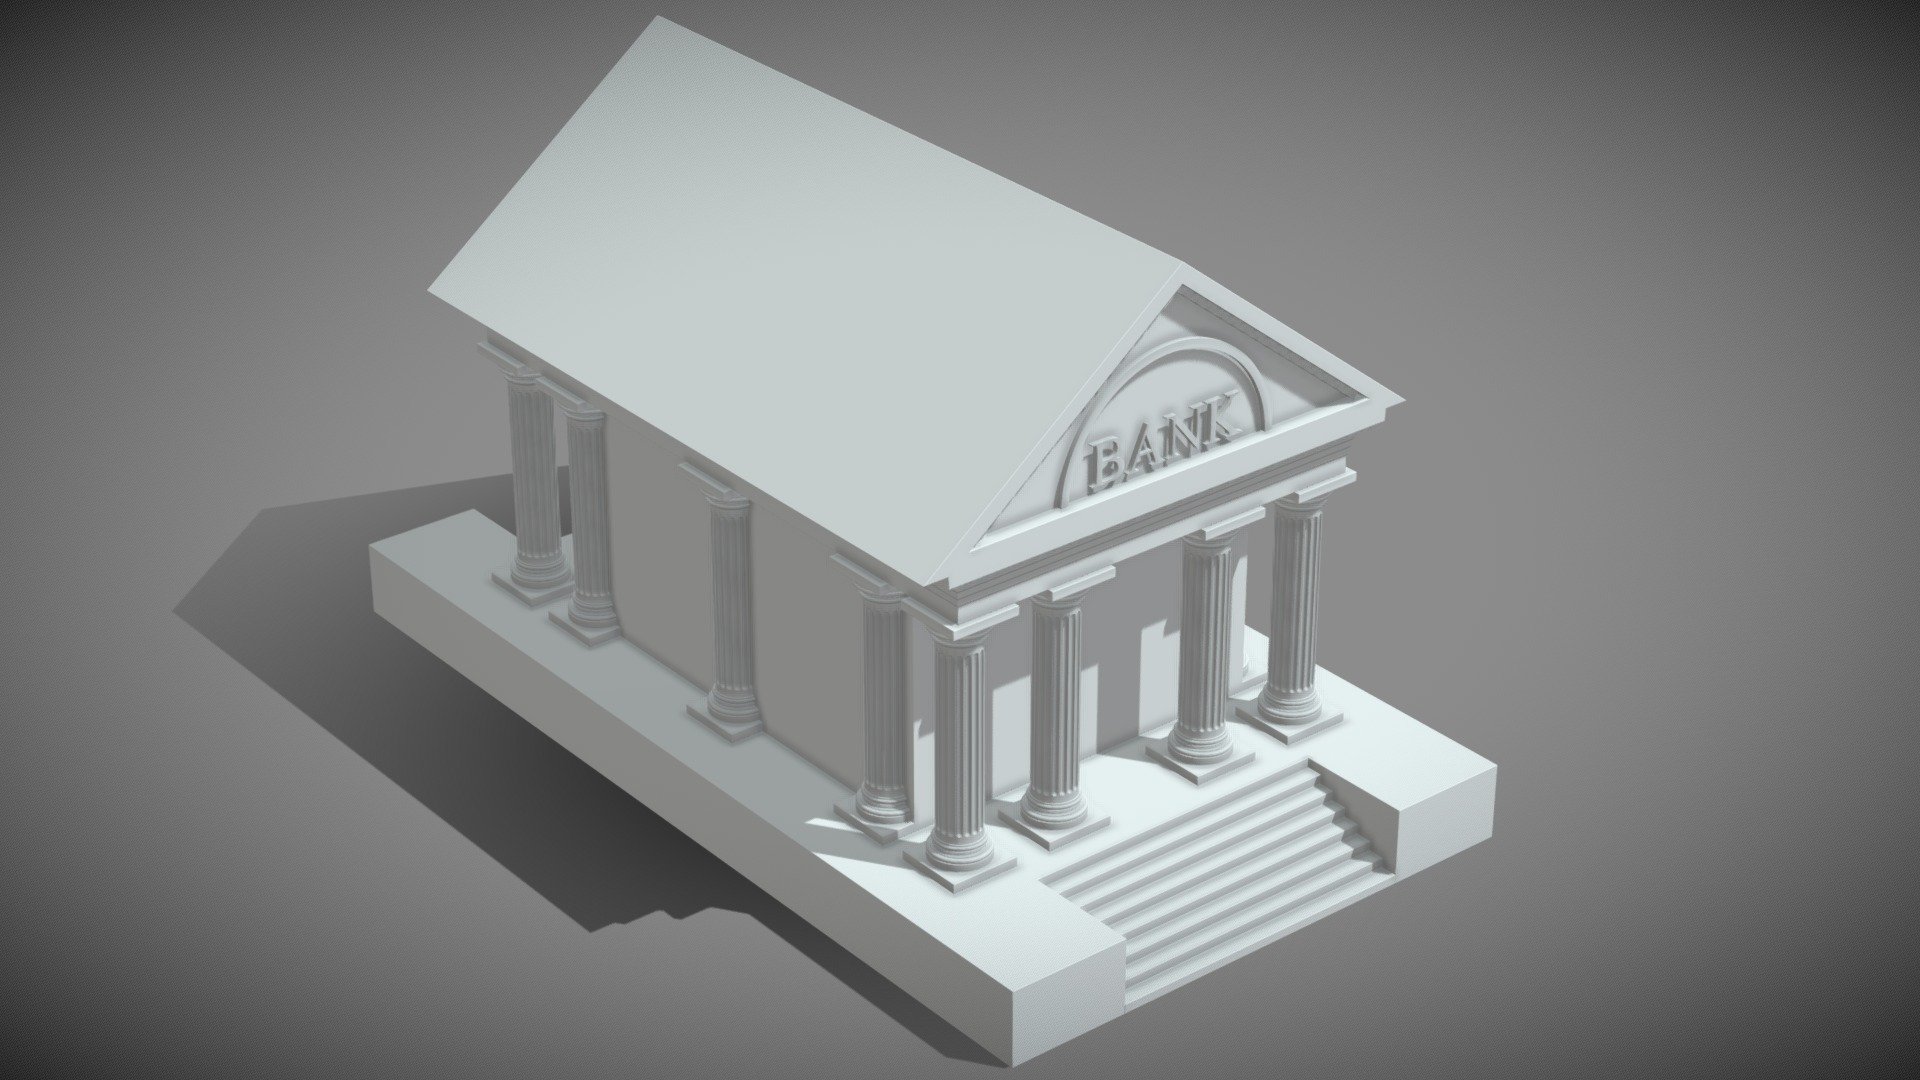 Detailed 3D Model of a Bank building structure symbol.

Perfect for high resolution rendering, stock image creation, 3D Graphics and animations 3d model